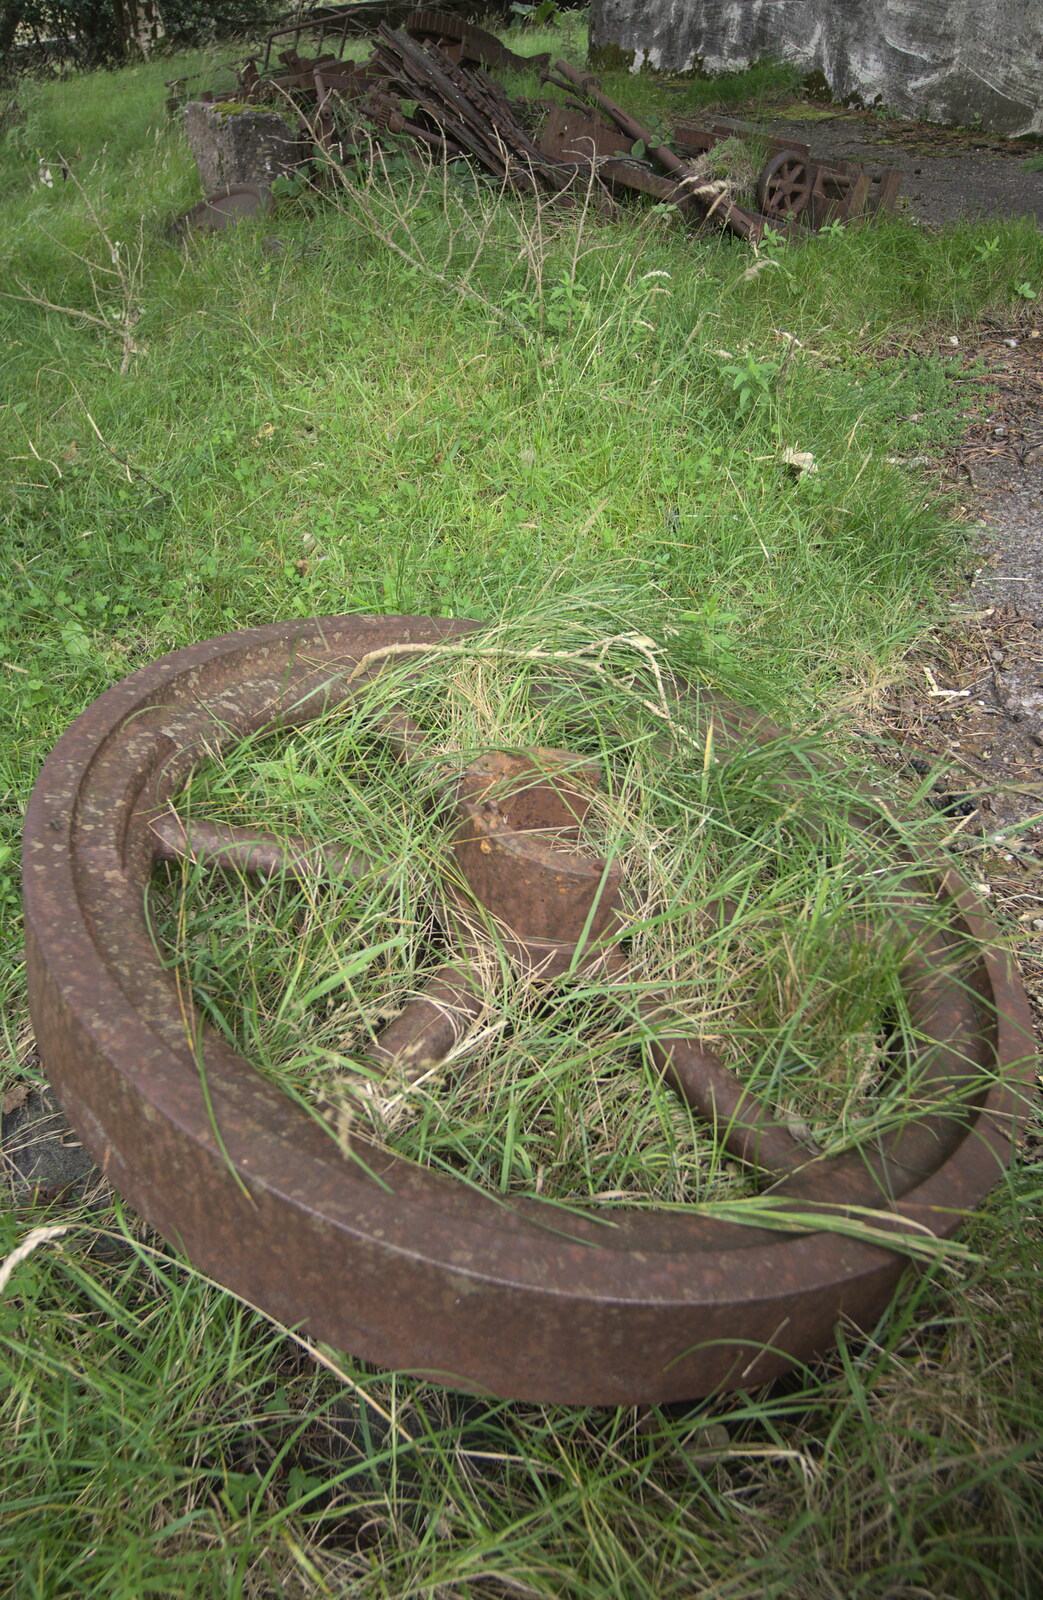 Iron wheel in the grass from From Achill to Strokestown, Mayo and Roscommon, Ireland - 10th August 2017